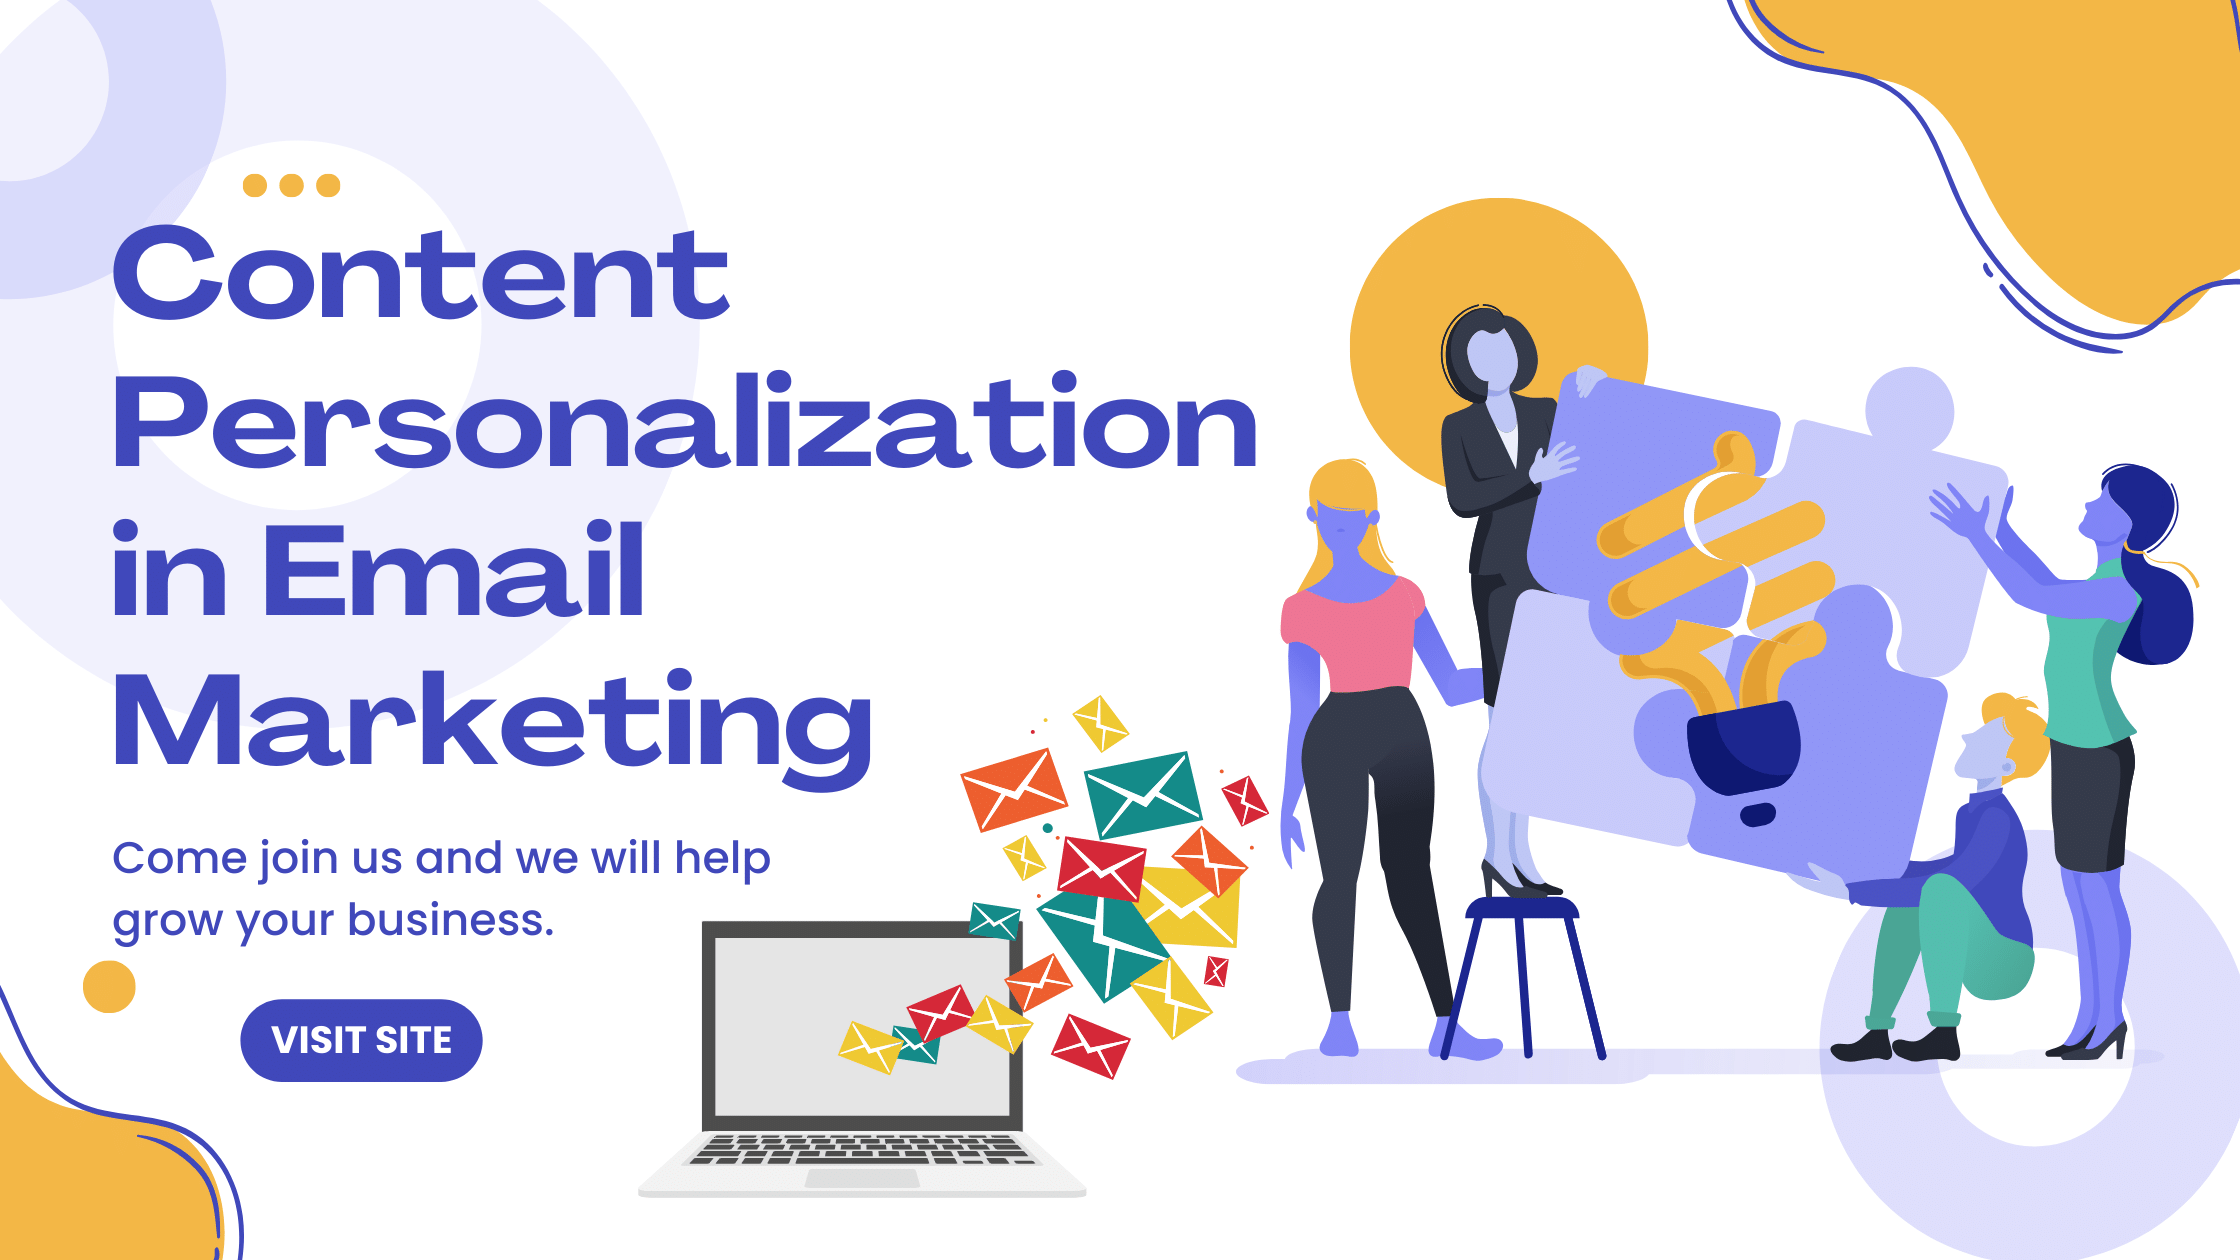 Content Personalization in Email Marketing